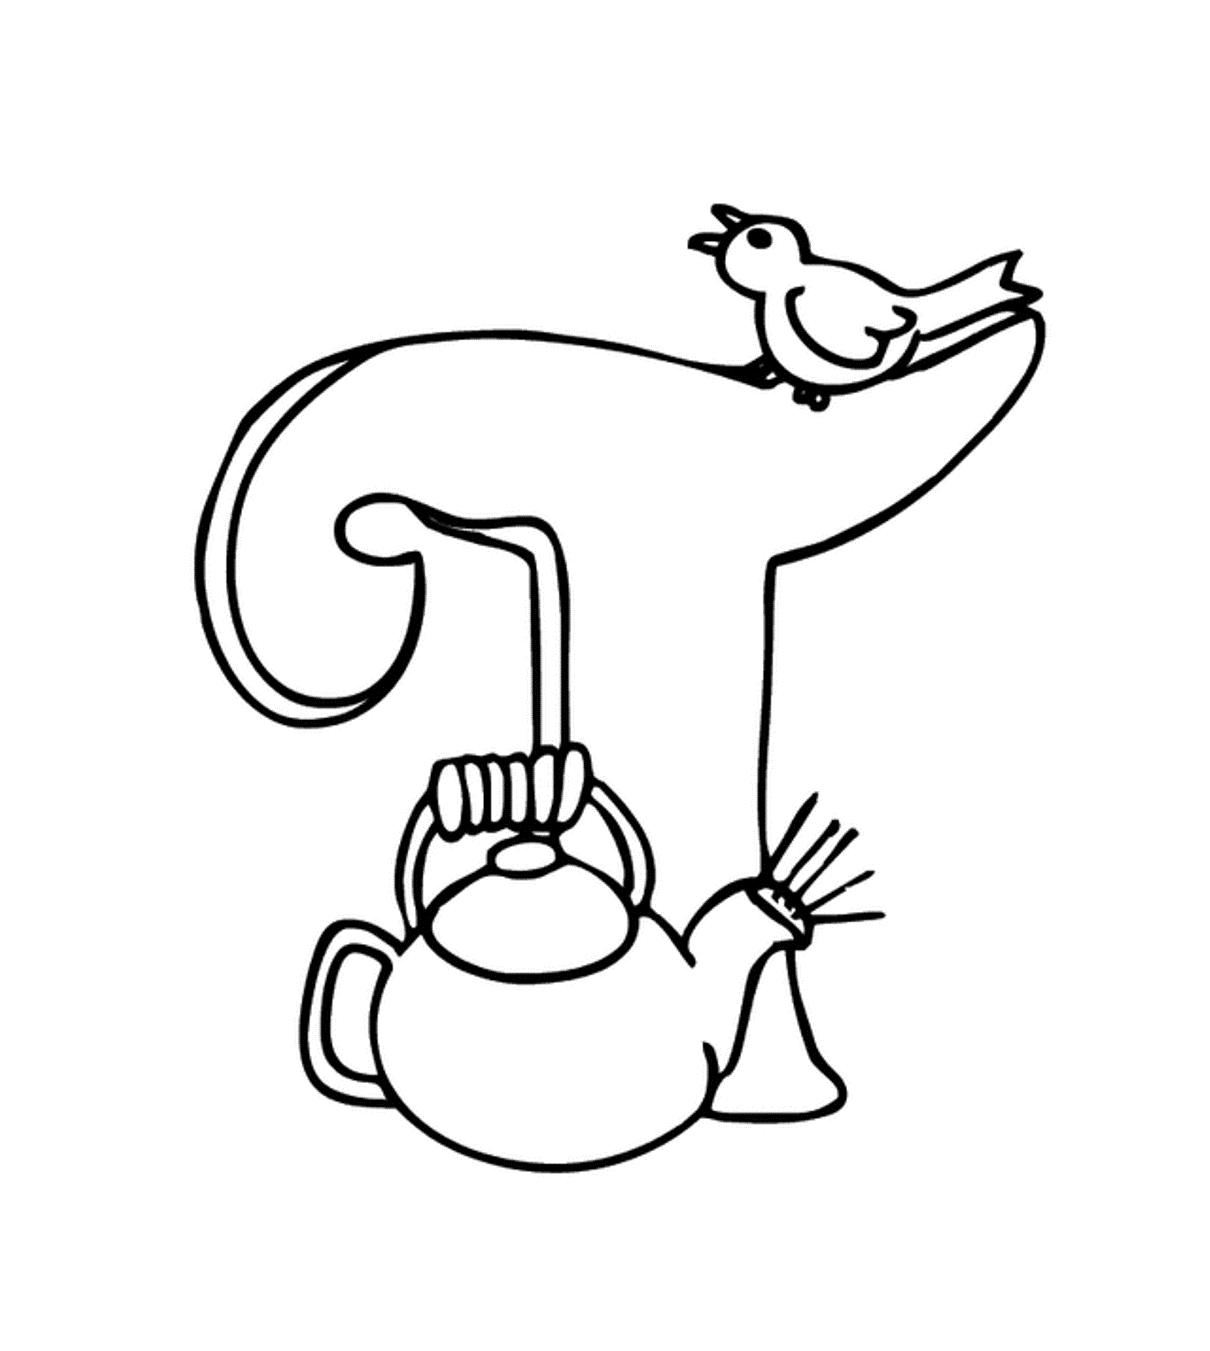 Teapot Alphabet Coloring Page | Alphabet Coloring pages of ...